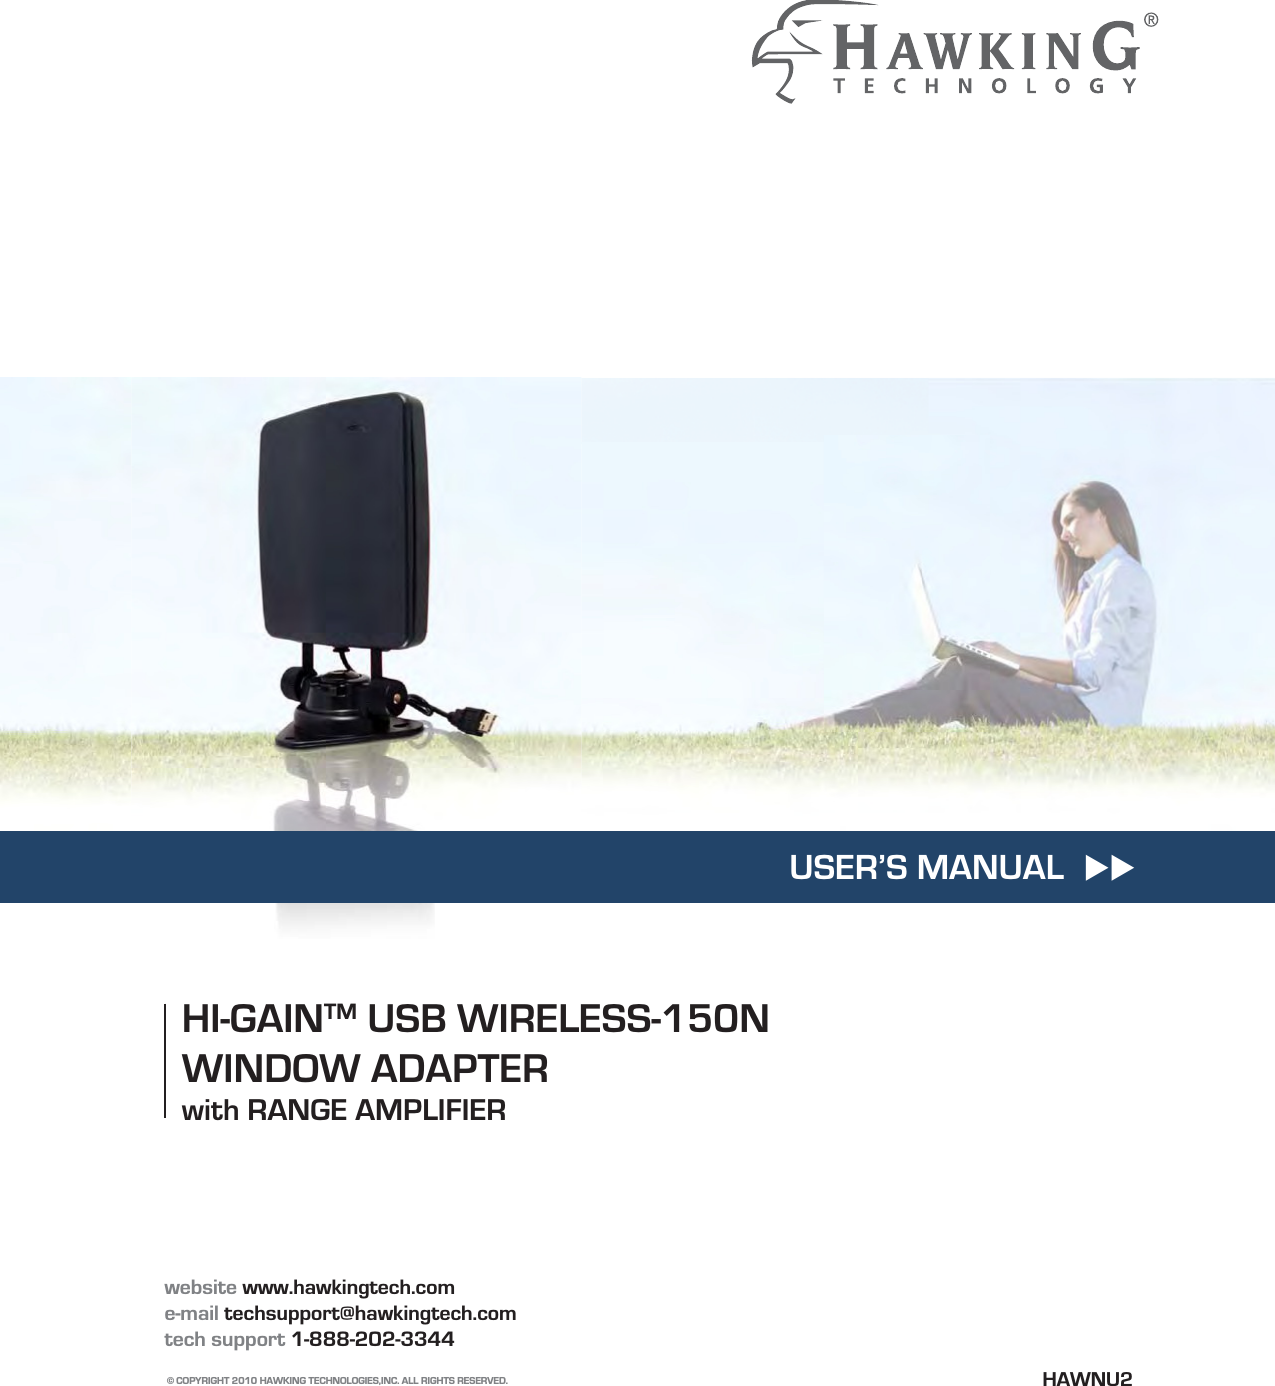 website www.hawkingtech.come-mail techsupport@hawkingtech.comtech support 1-888-202-3344© COPYRIGHT 2010 HAWKING TECHNOLOGIES,INC. ALL RIGHTS RESERVED.        HI-GAINTM USB WIRELESS-150N WINDOW ADAPTERwith RANGE AMPLIFIERHAWNU2USER’S MANUAL